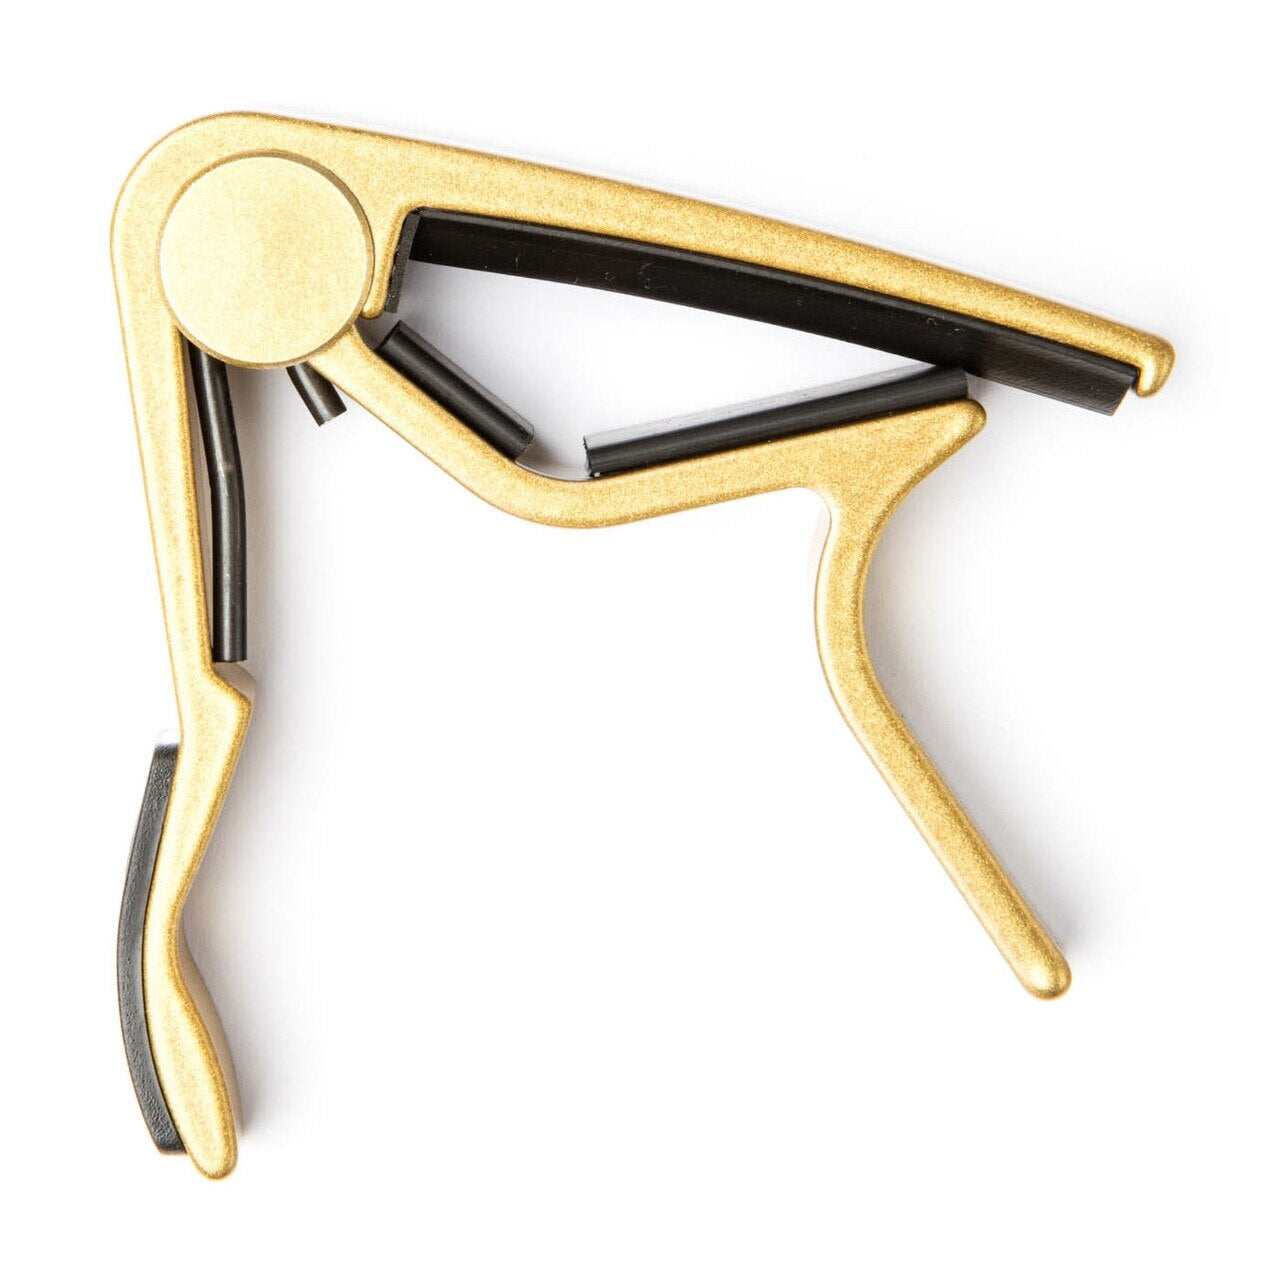 Dunlop 83CG Trigger Capo Acoustic Curved (Gold) 變調夾